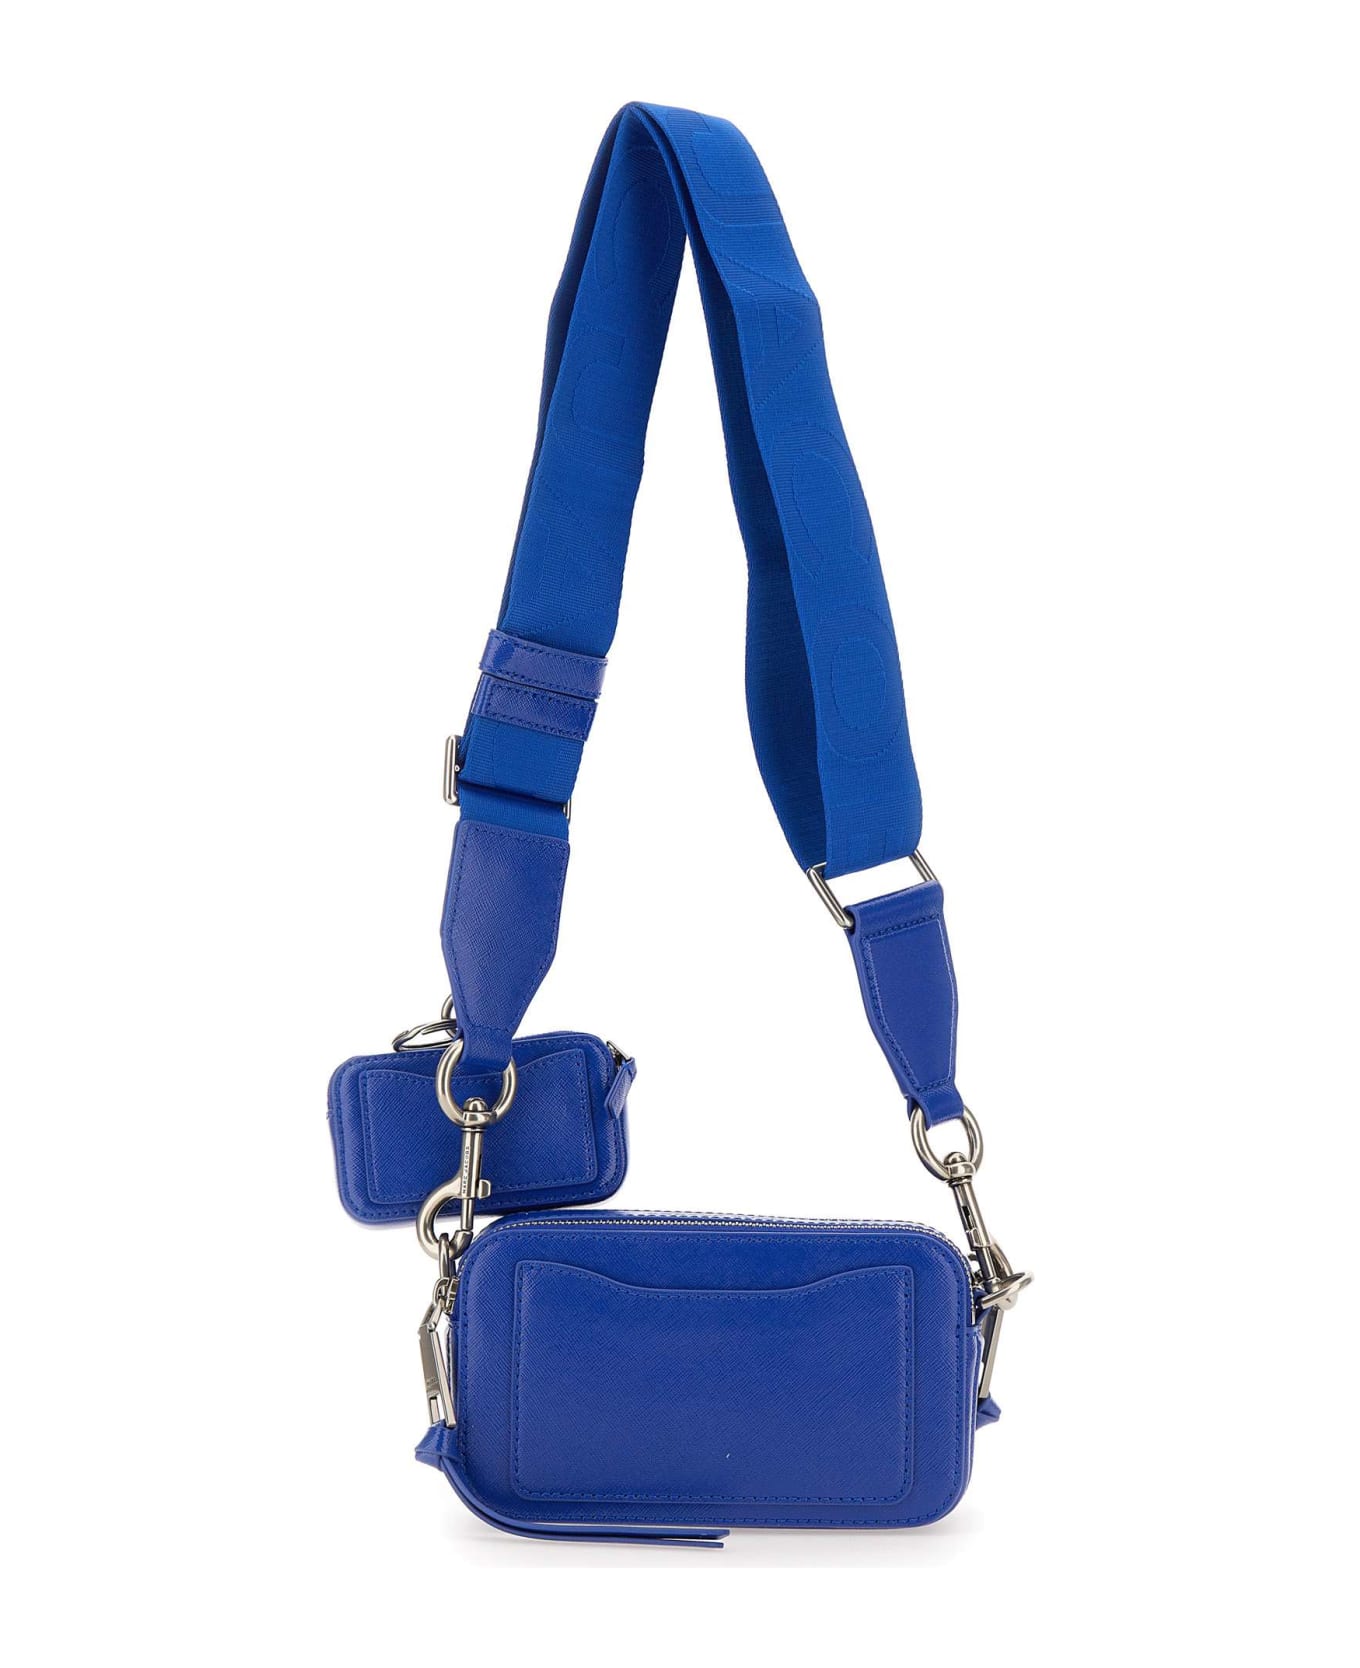 Marc Jacobs "the Utility Snapshot" Leather Bag - BLUE